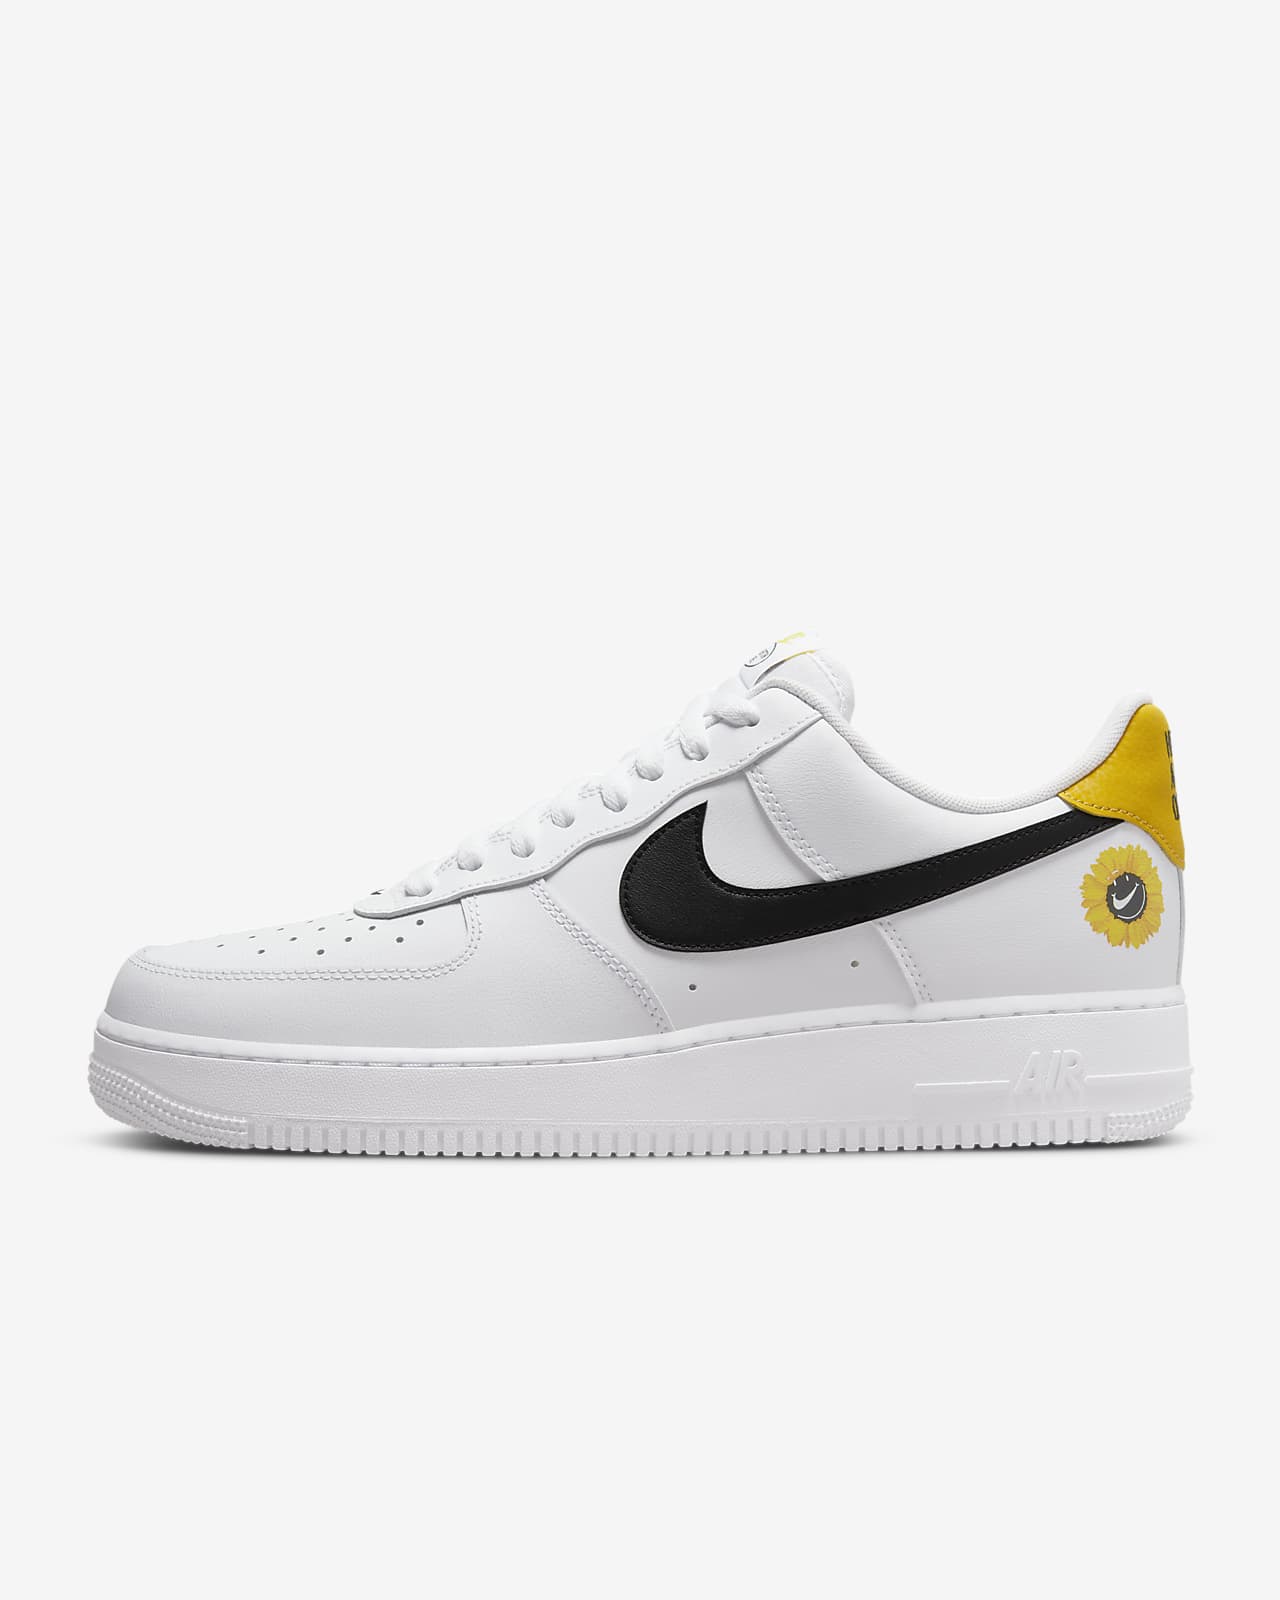 Nike Air Force 1 '07 LV8 Men's Shoes شكو ماكو